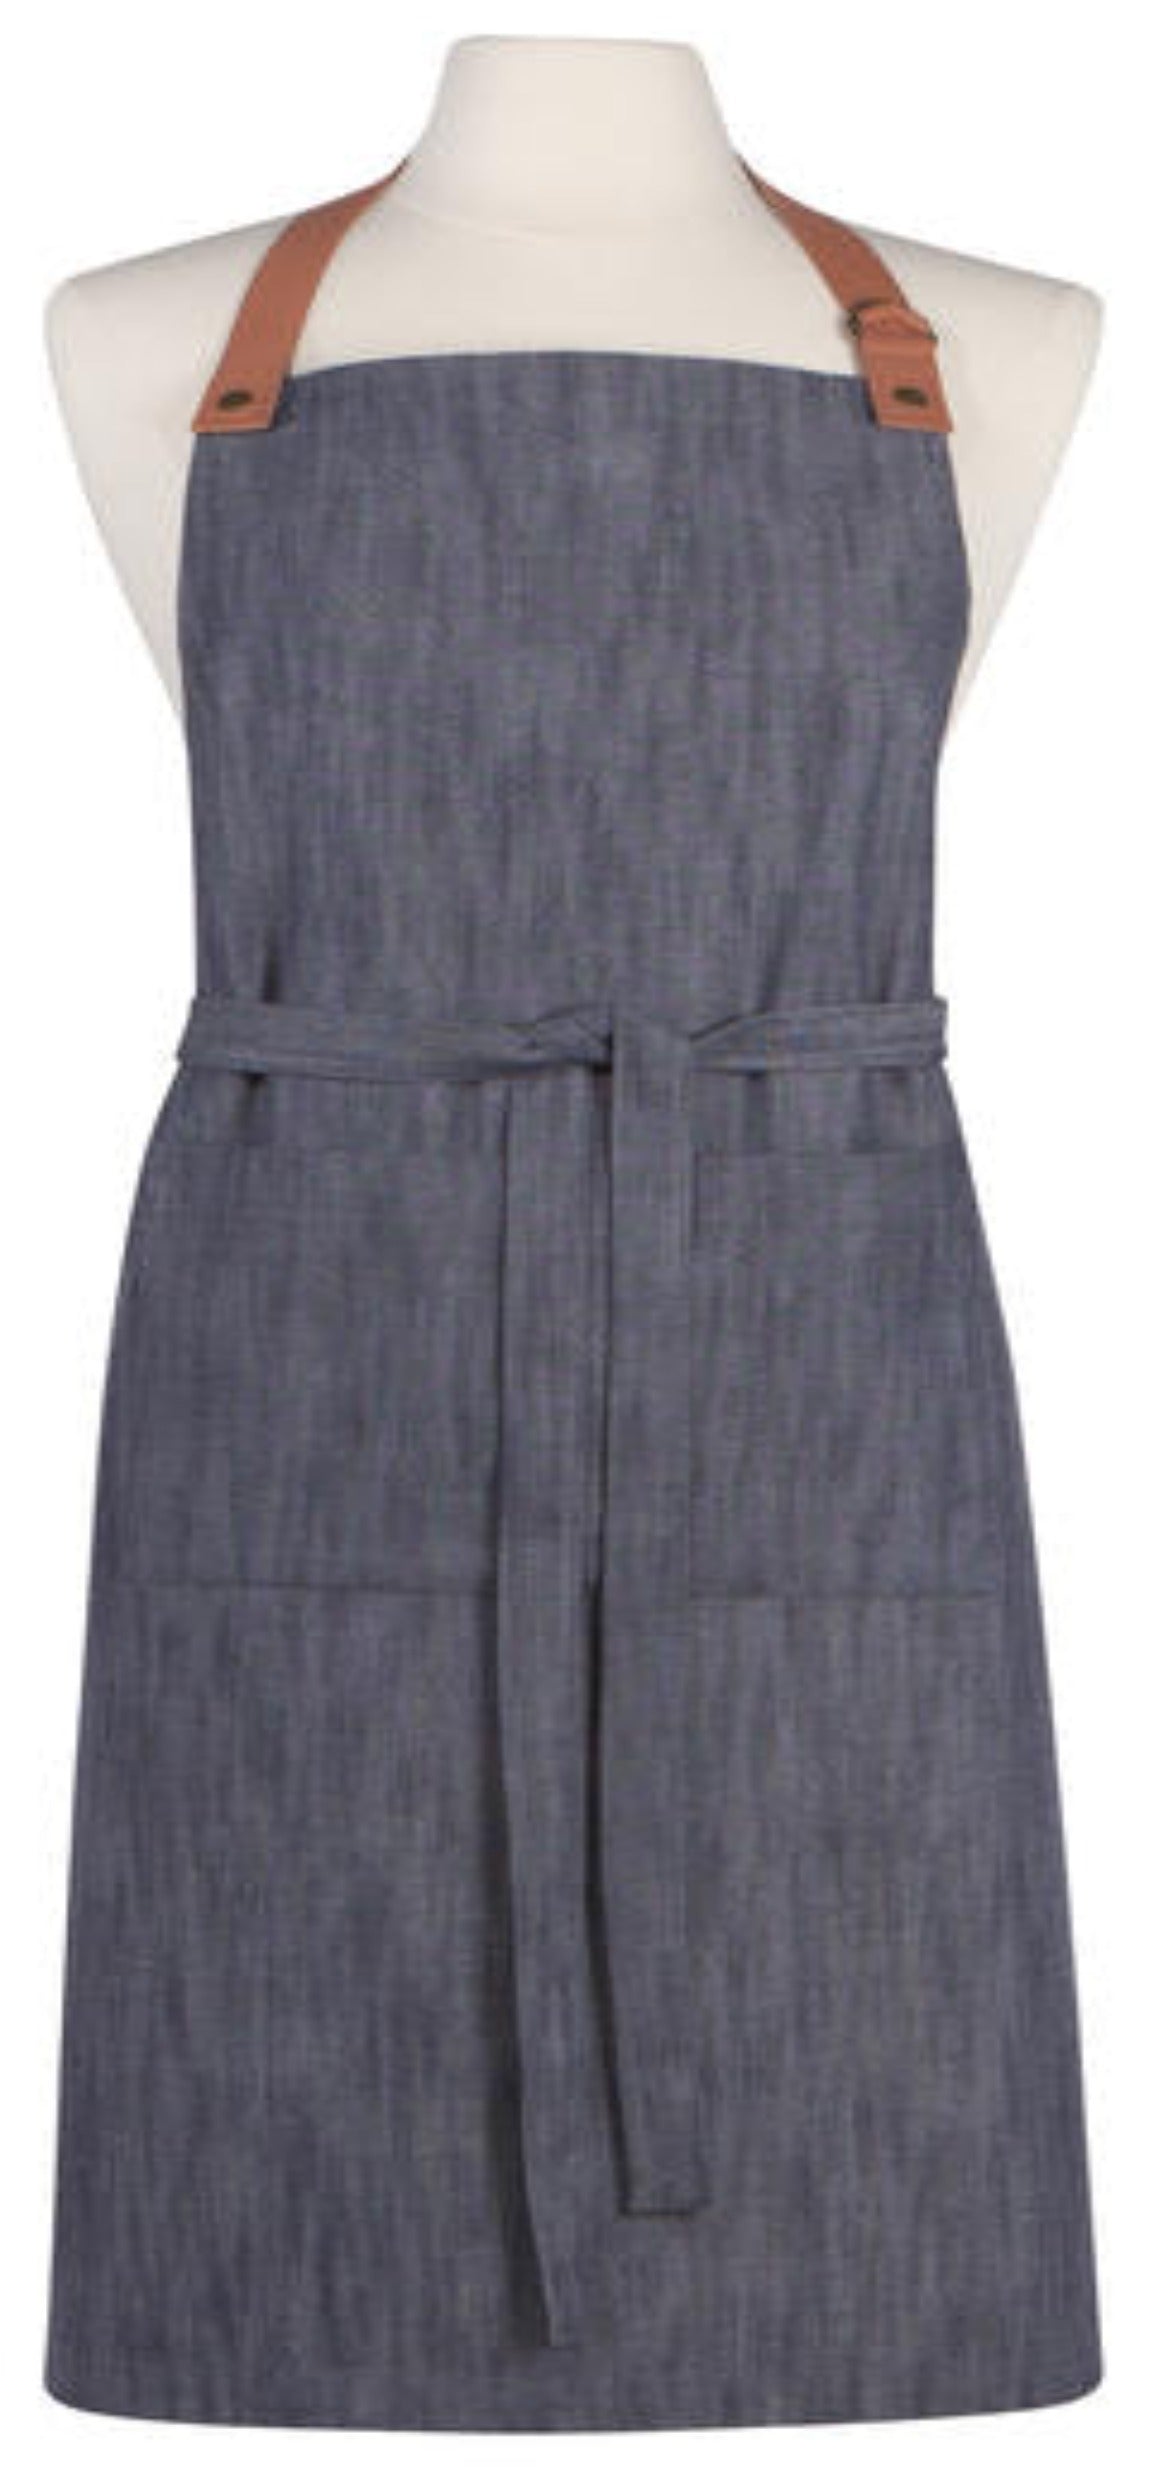 bluish grey apron with leather straps